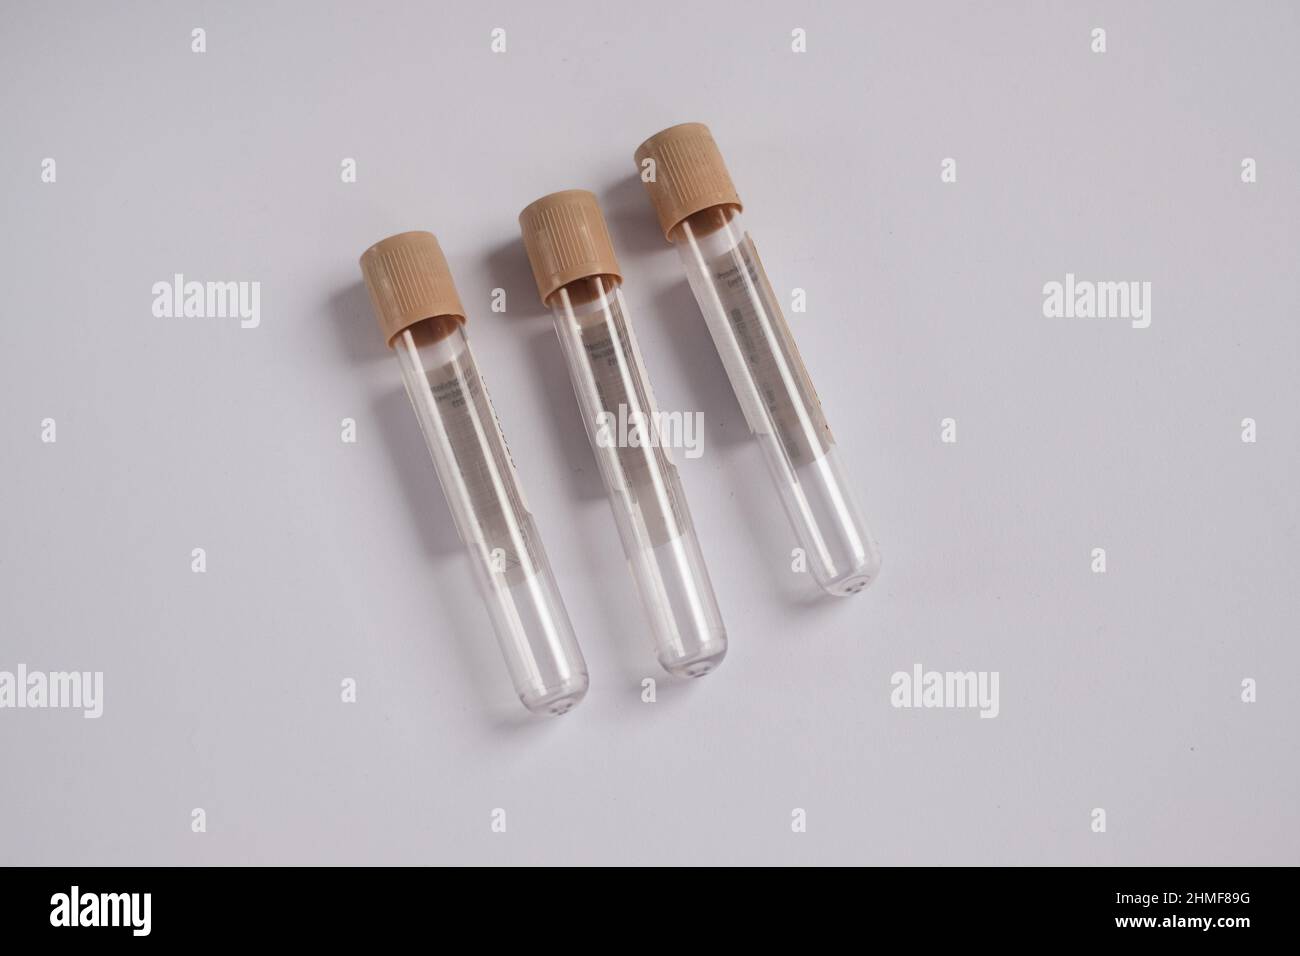 Blood collection tubes with brown caps. Medical treatment and pharmacy concept. Stock Photo